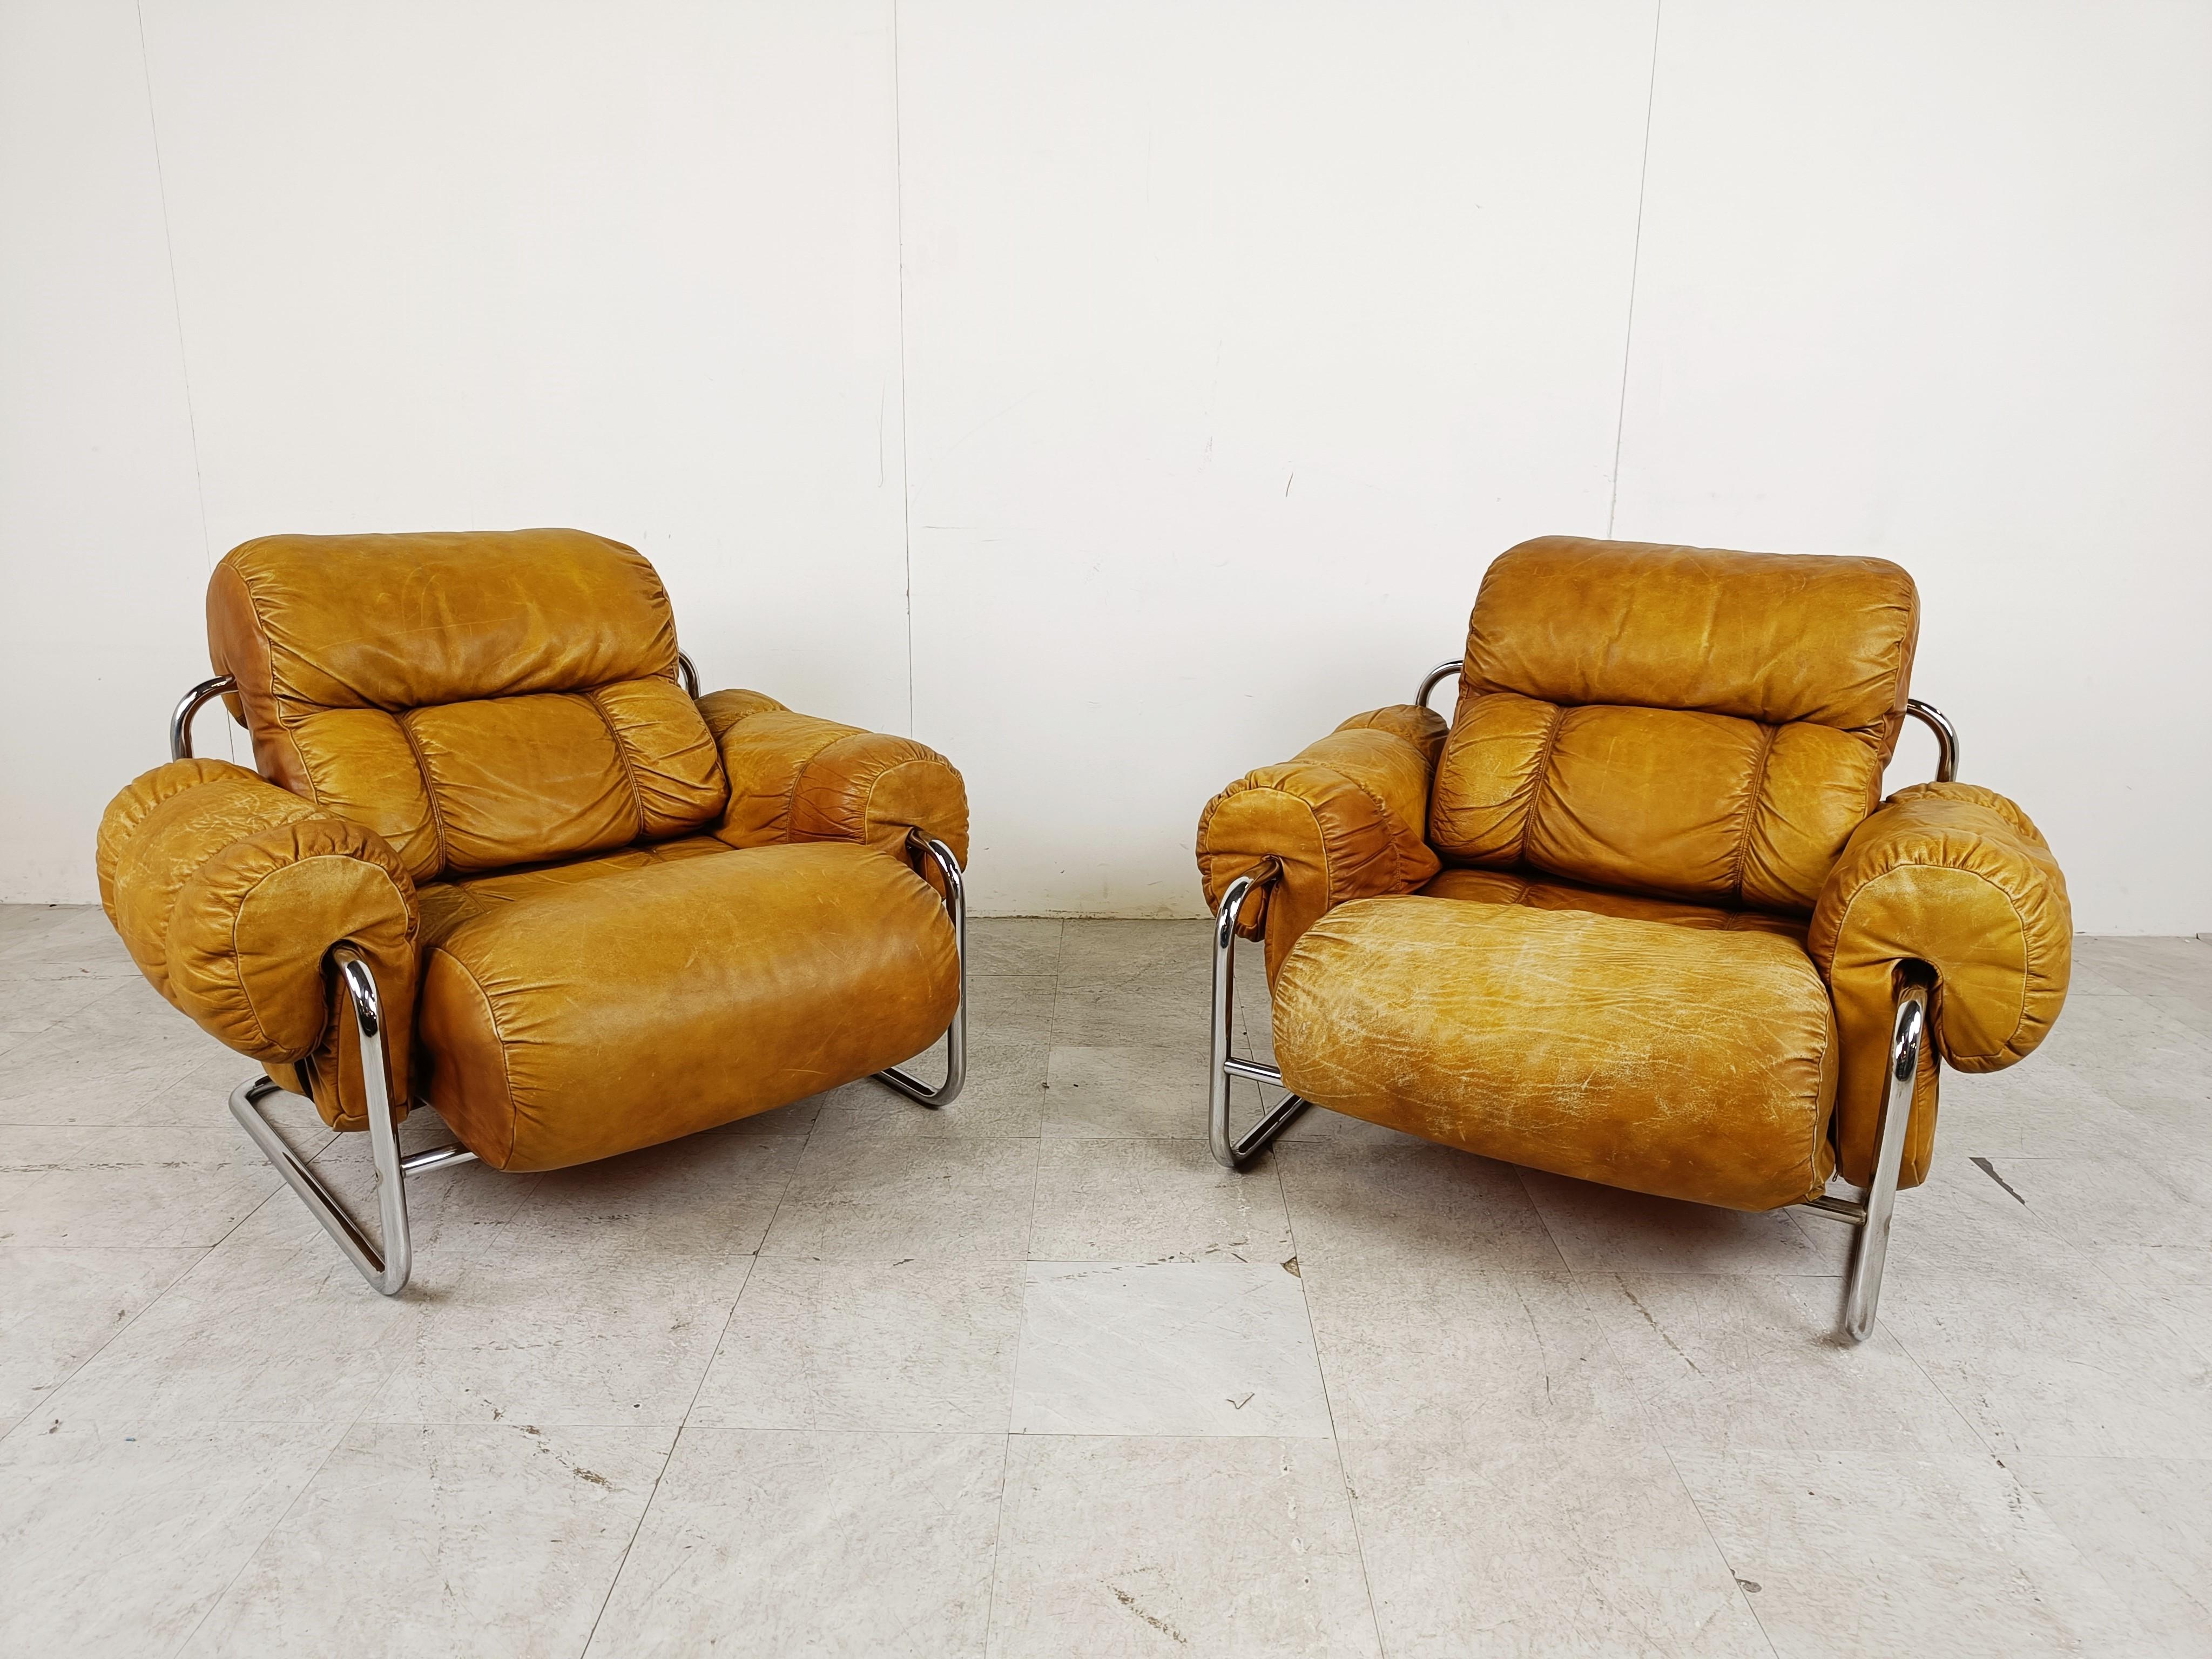 Pair of mid century Tucroma armchairs designed by Guido Faleschini for Mariani.

The armchairs consists of a chromed tubular frame with thick and nicely patinated leather cushions strapped to it.

Striking mid century italian design which are